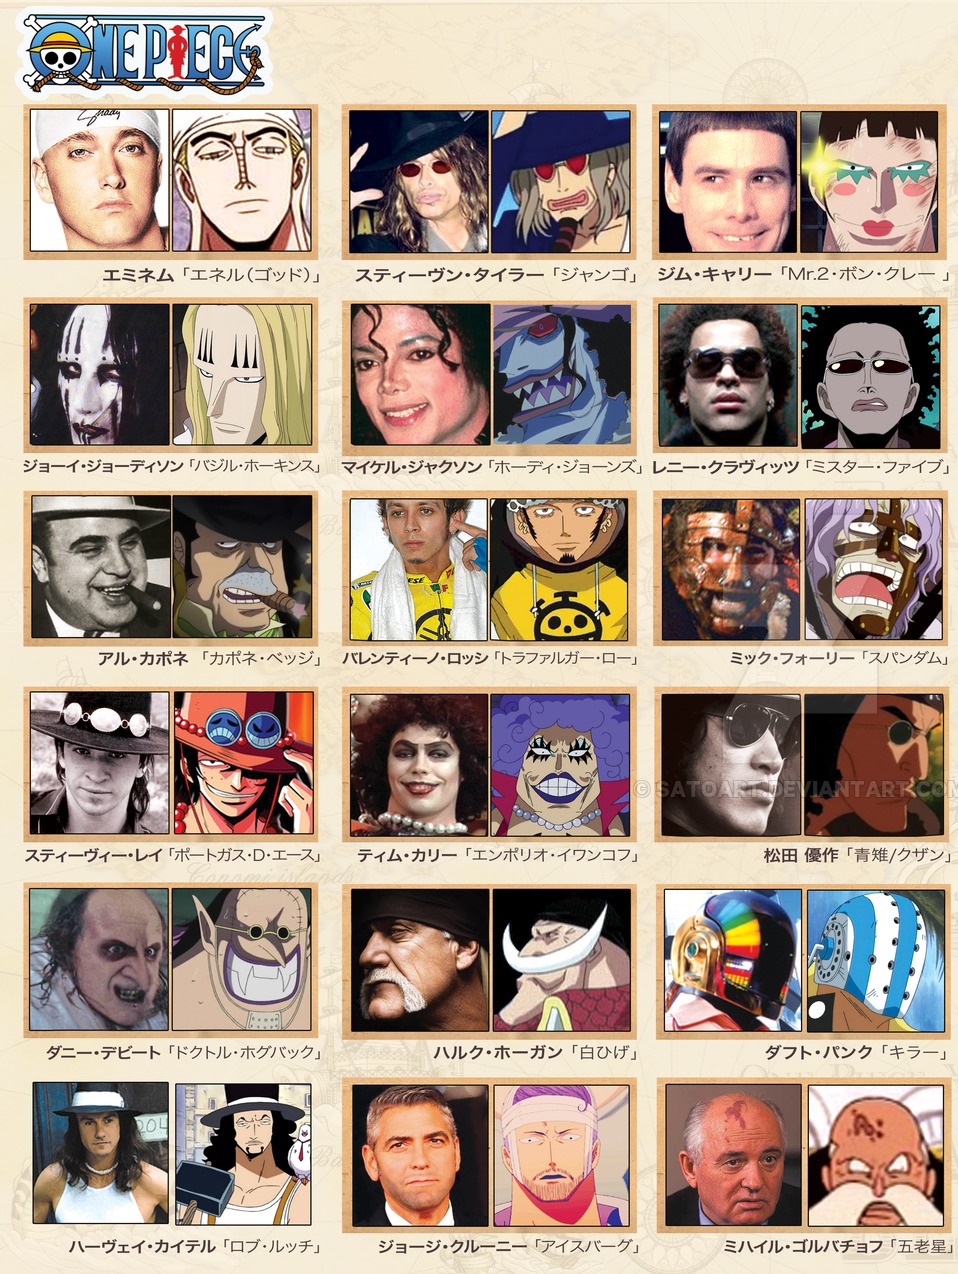 Oda’s Inspiration Behind One Piece Characters